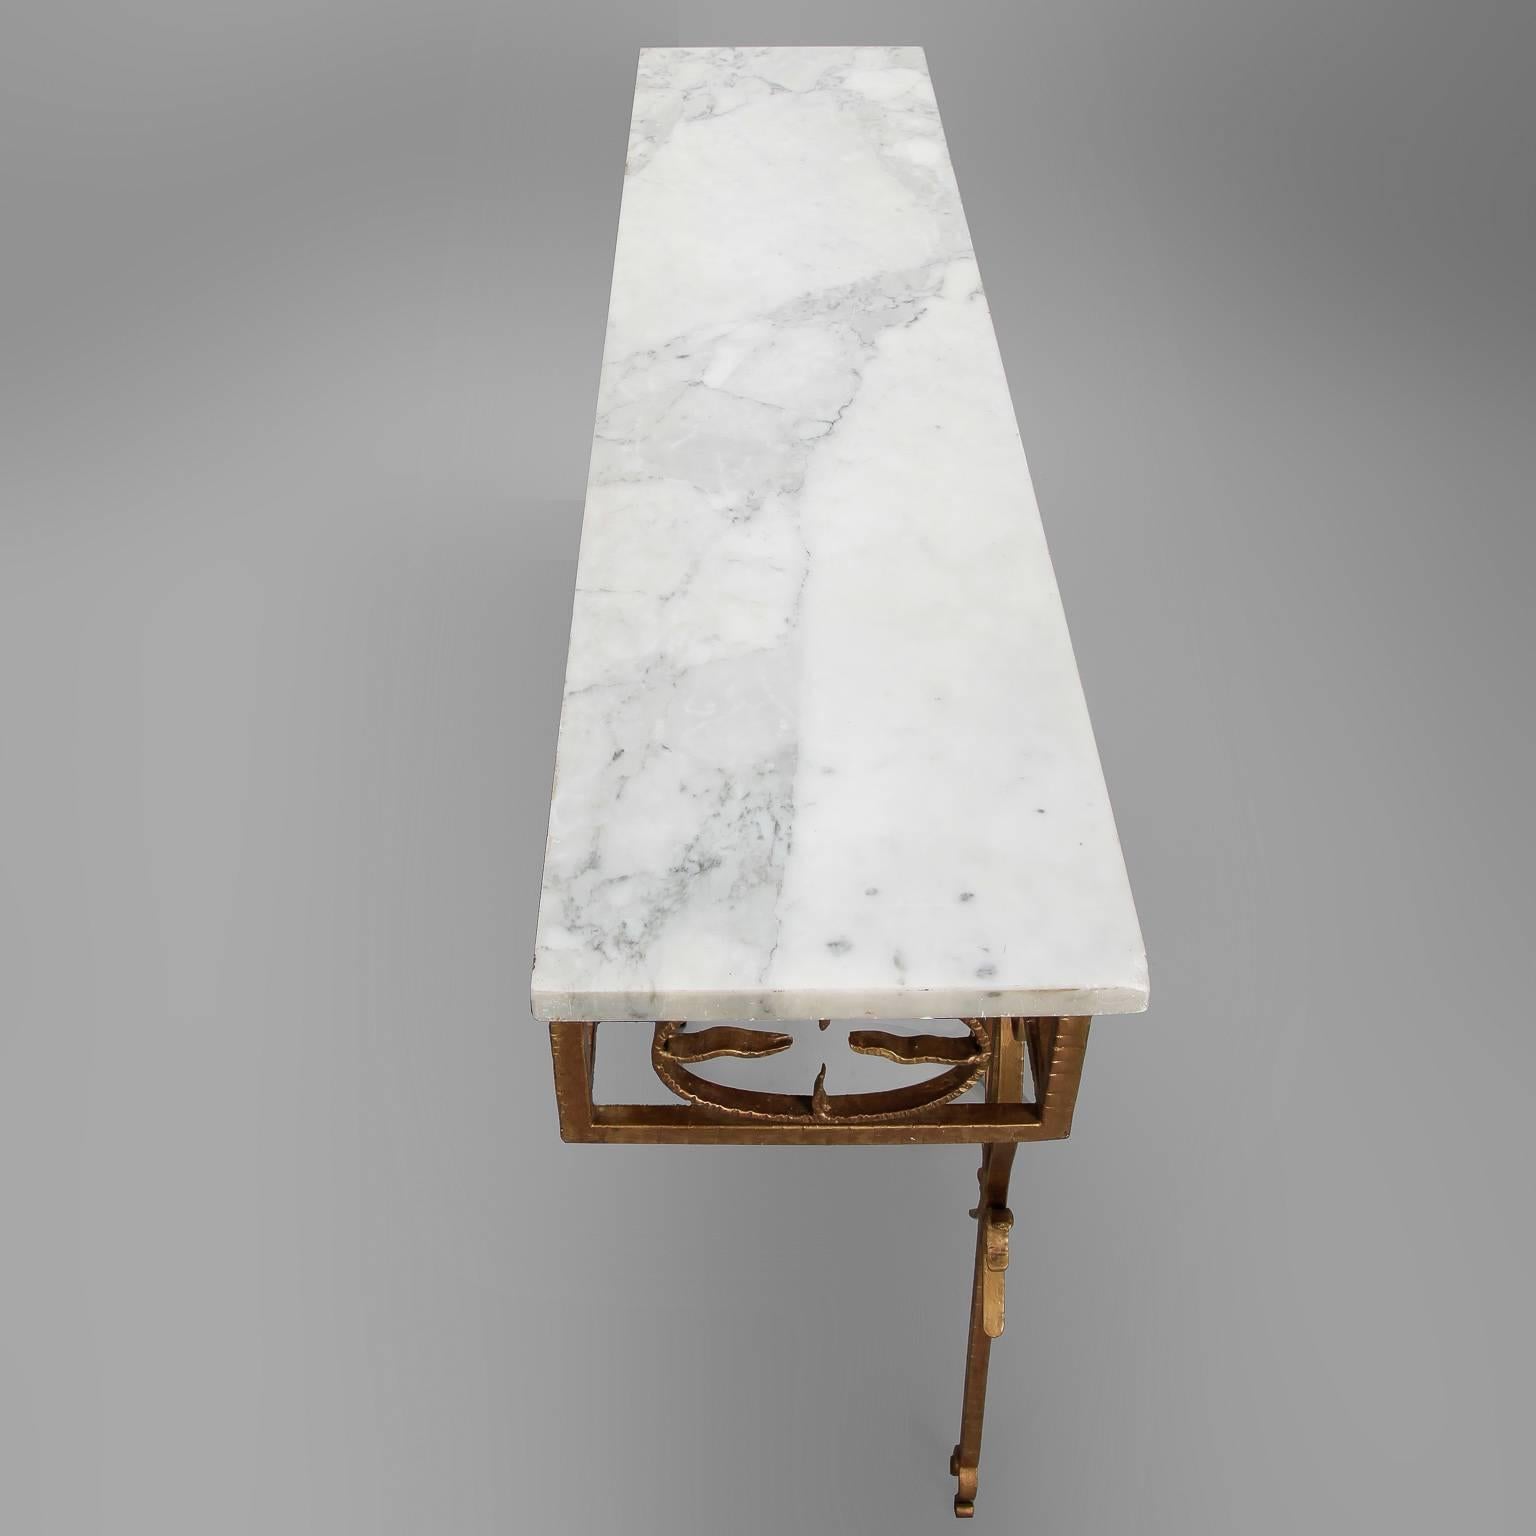 Wall hung console has gilt iron base with decorative scrolls and a white marble top, circa 1960s. Found in Italy. Unknown maker.

  